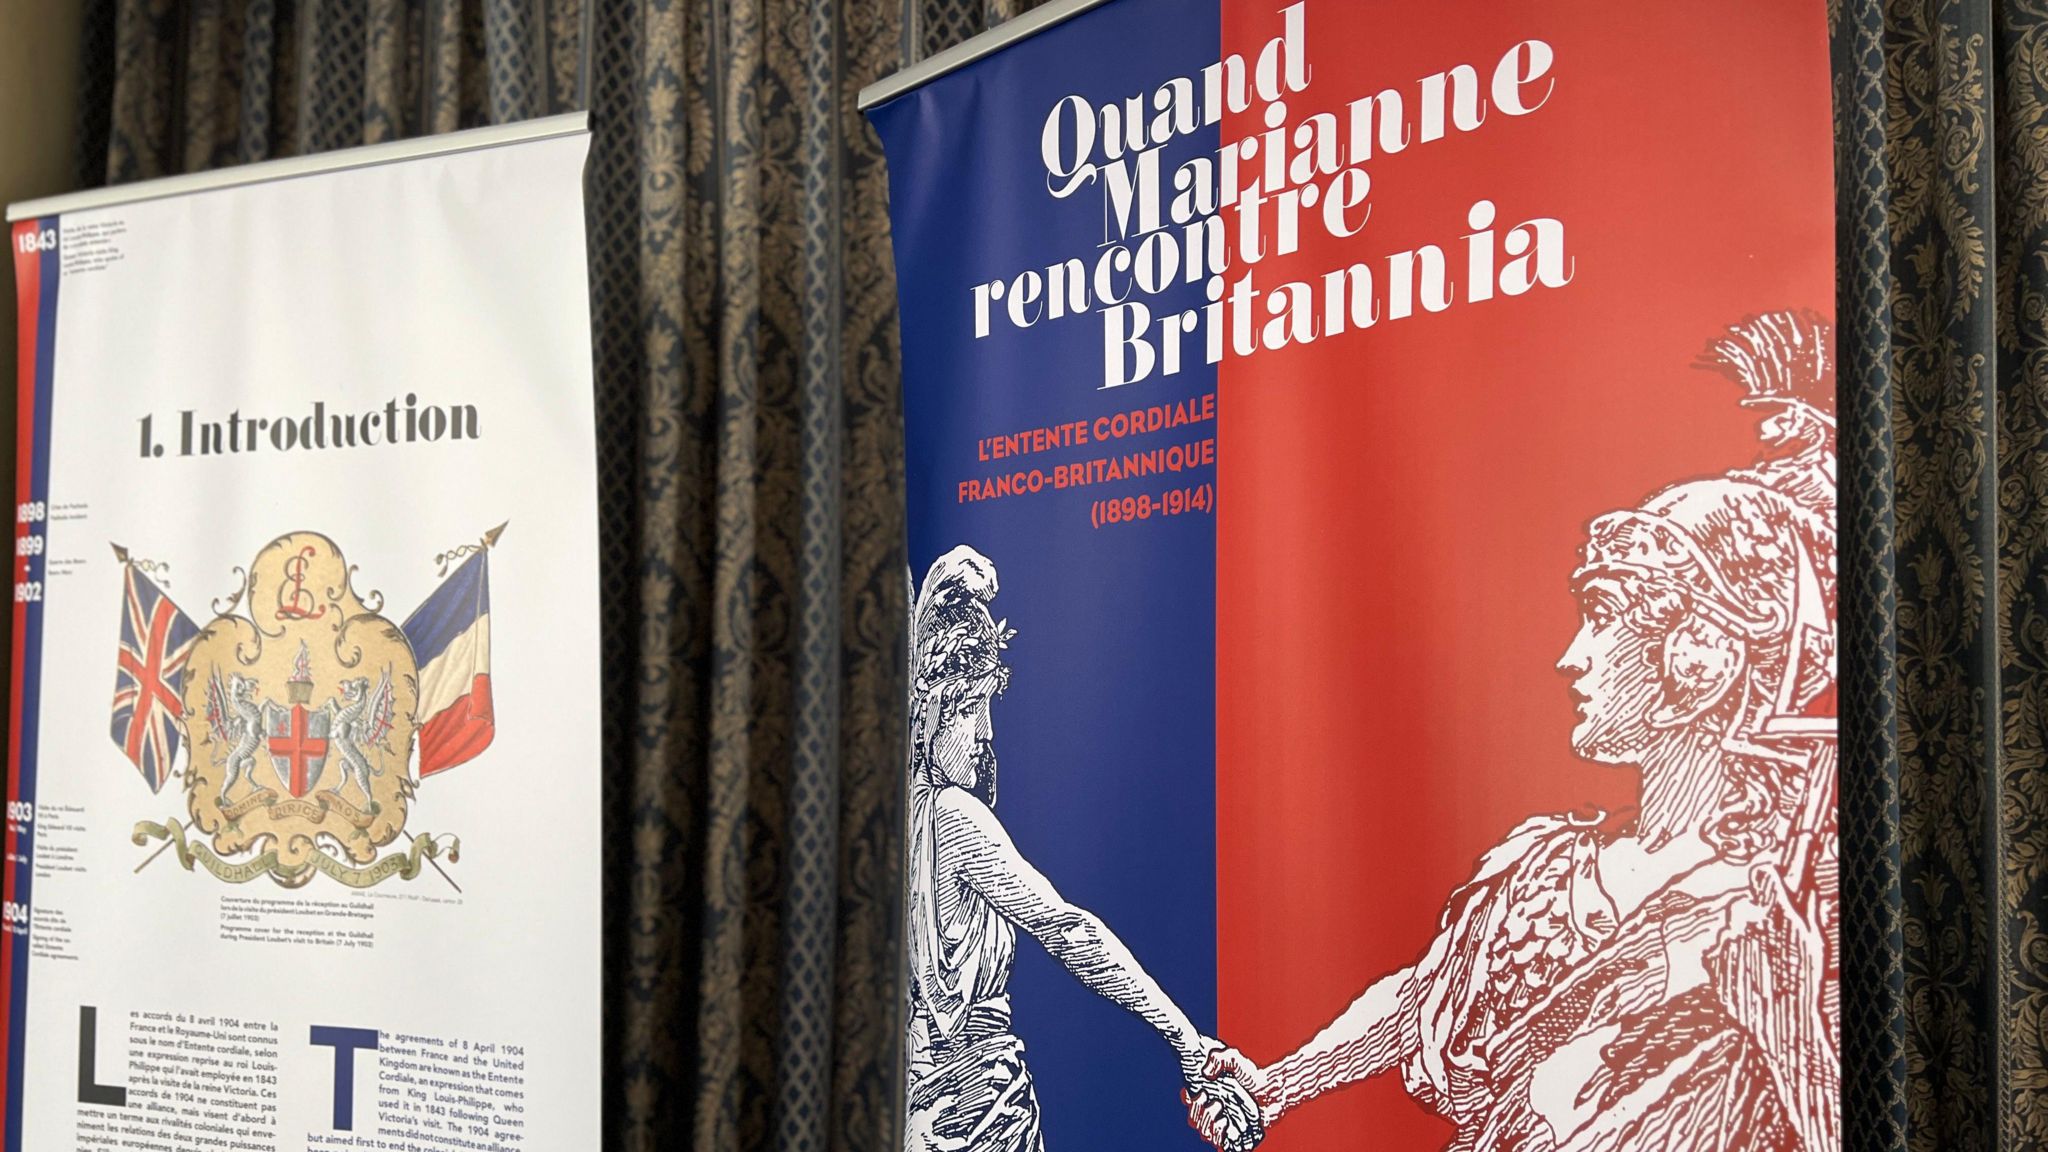 French banners with French and British flags and two historical characters shaking hands